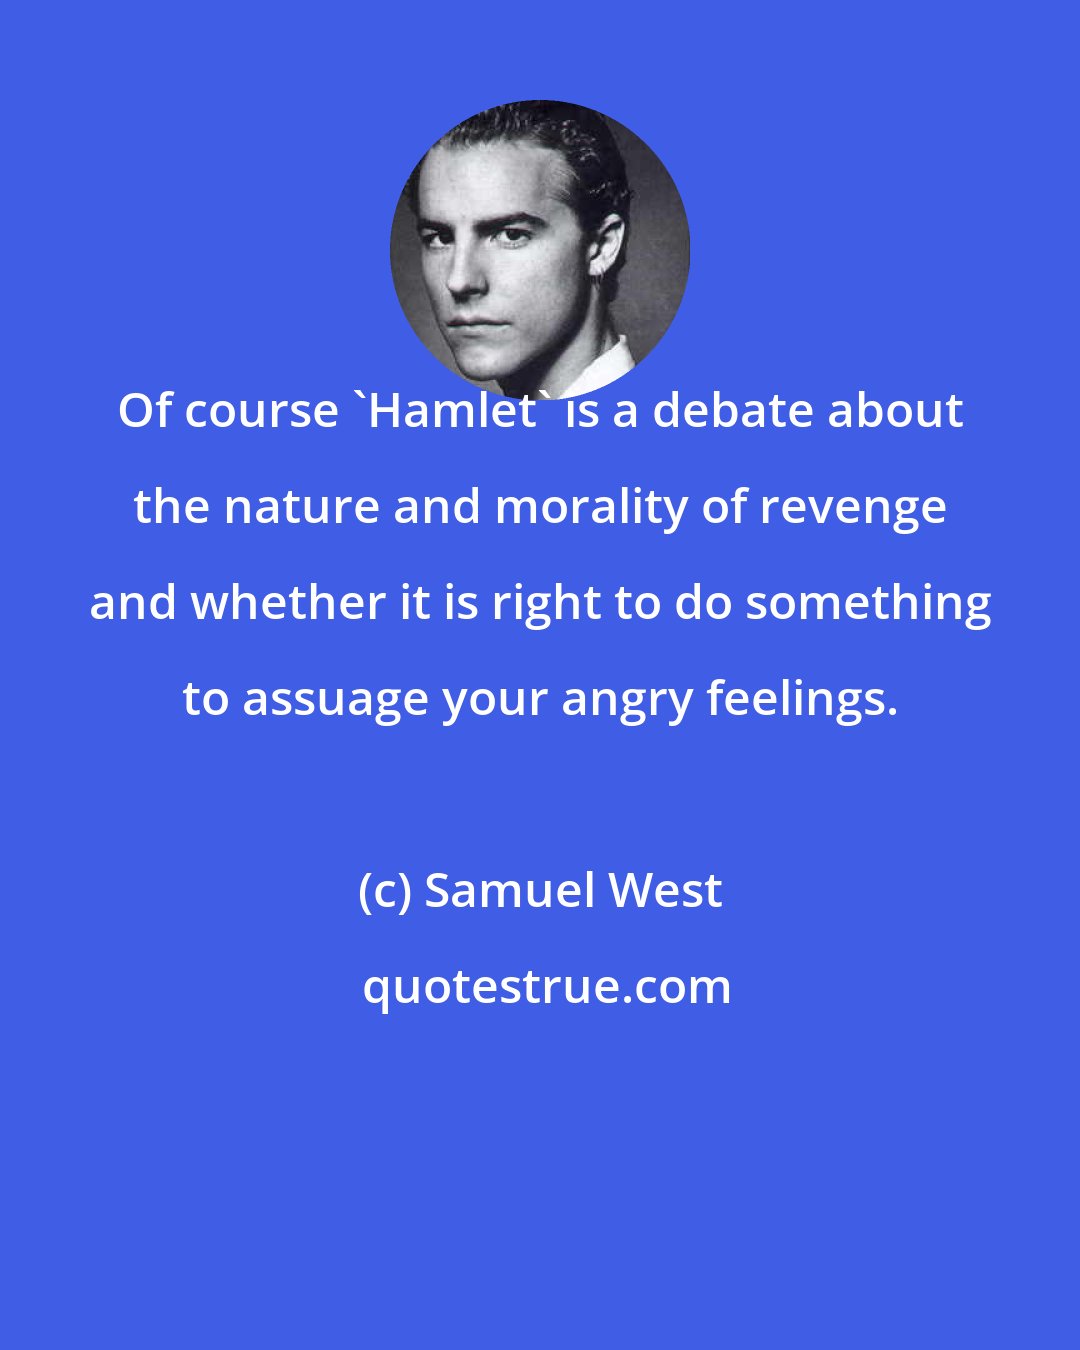 Samuel West: Of course 'Hamlet' is a debate about the nature and morality of revenge and whether it is right to do something to assuage your angry feelings.